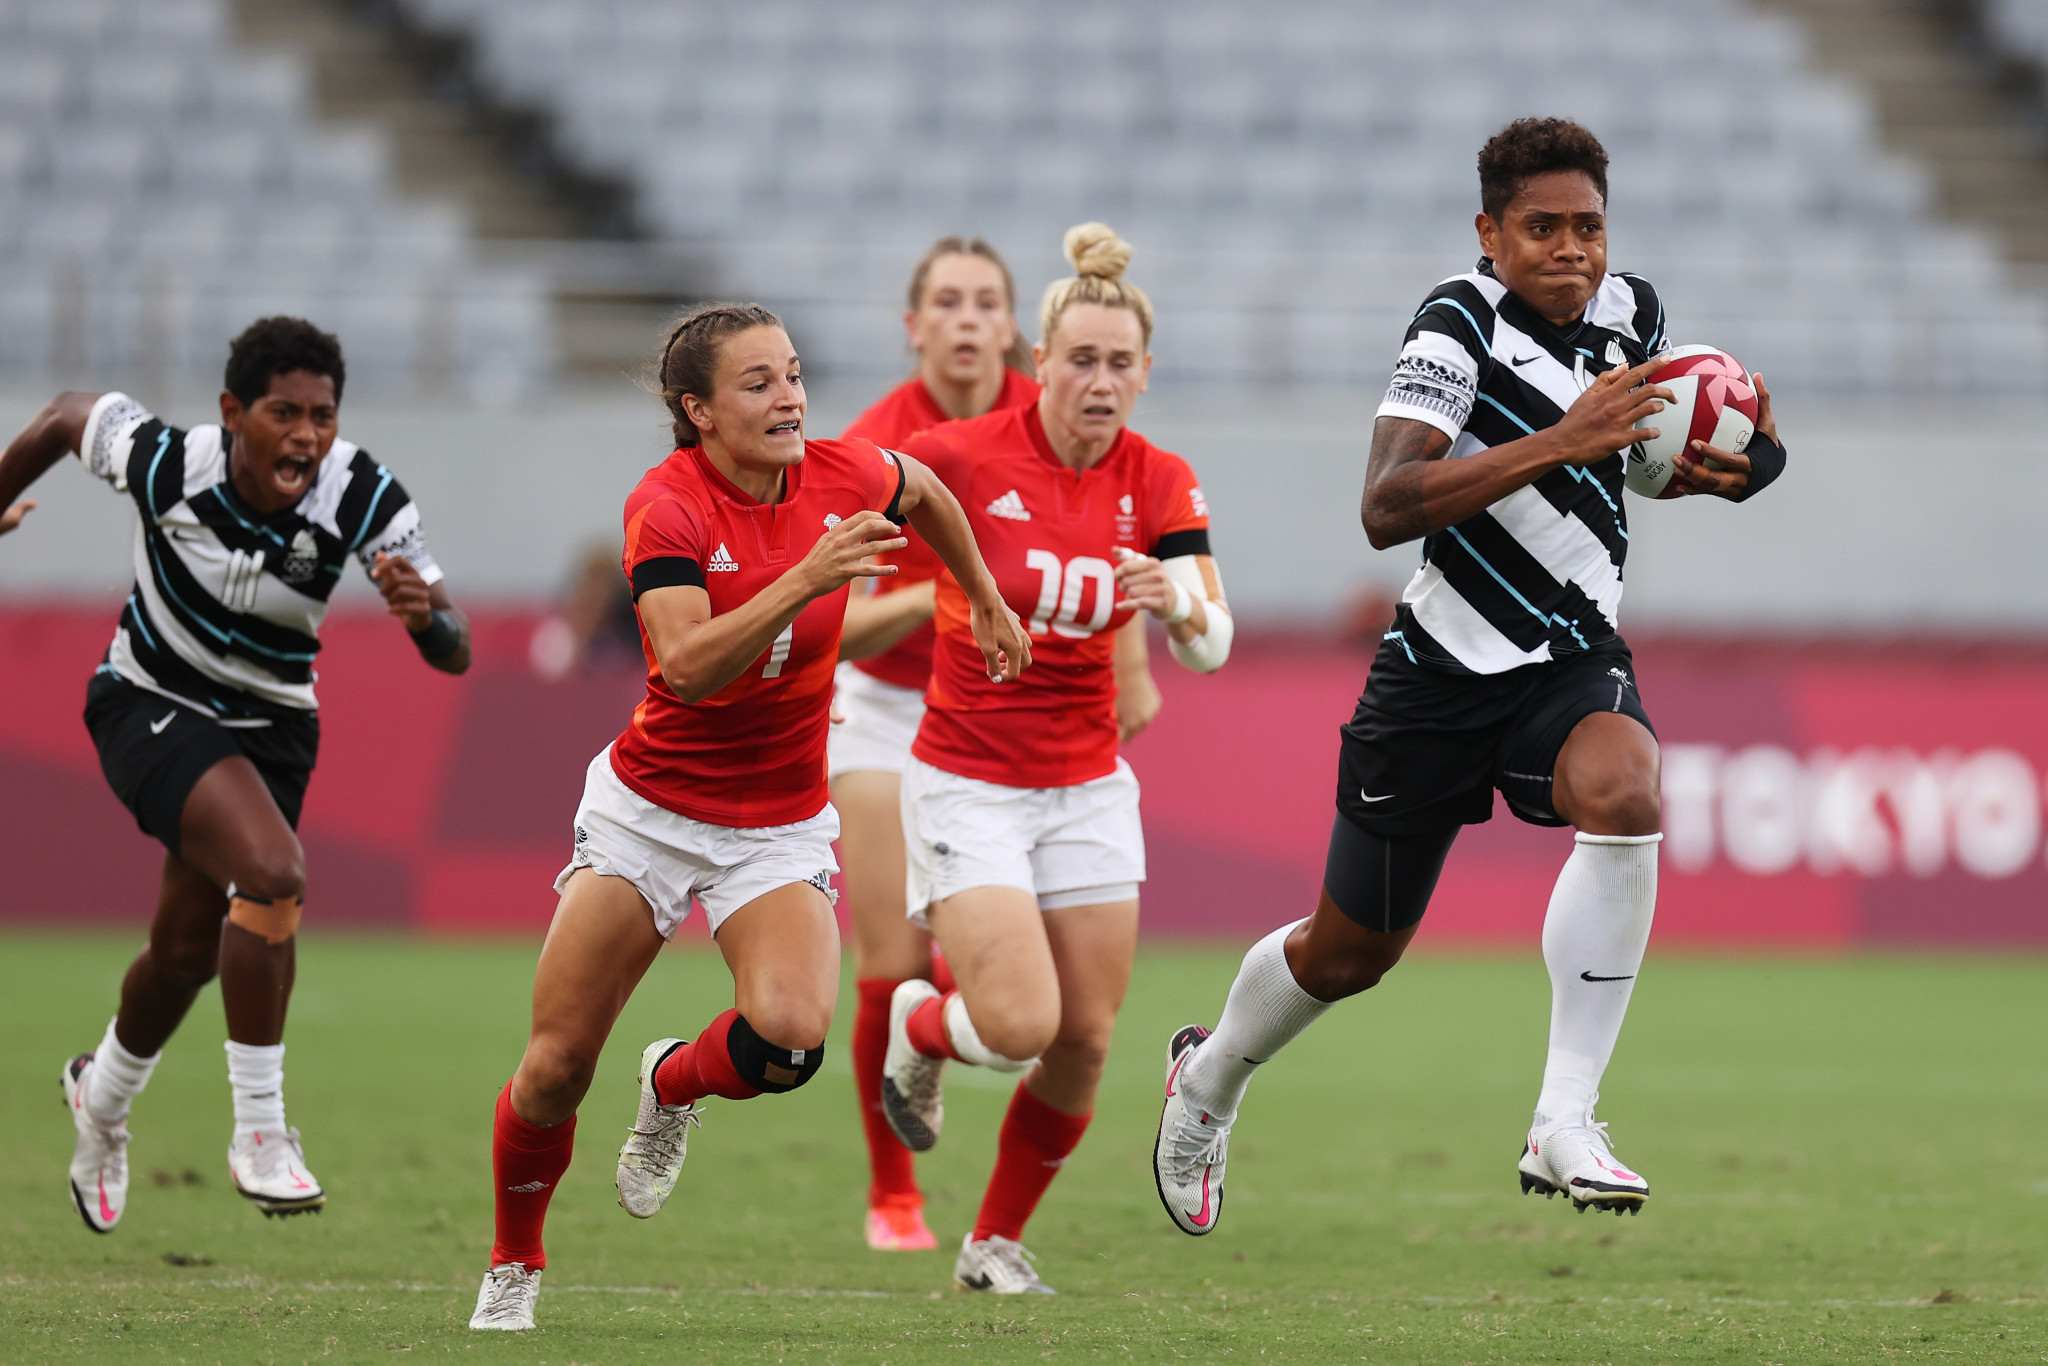 Having won women's bronze and men's gold at Tokyo 2020, Fiji will carry high hopes for rugby sevens into Birmingham 2022 ©Getty Images